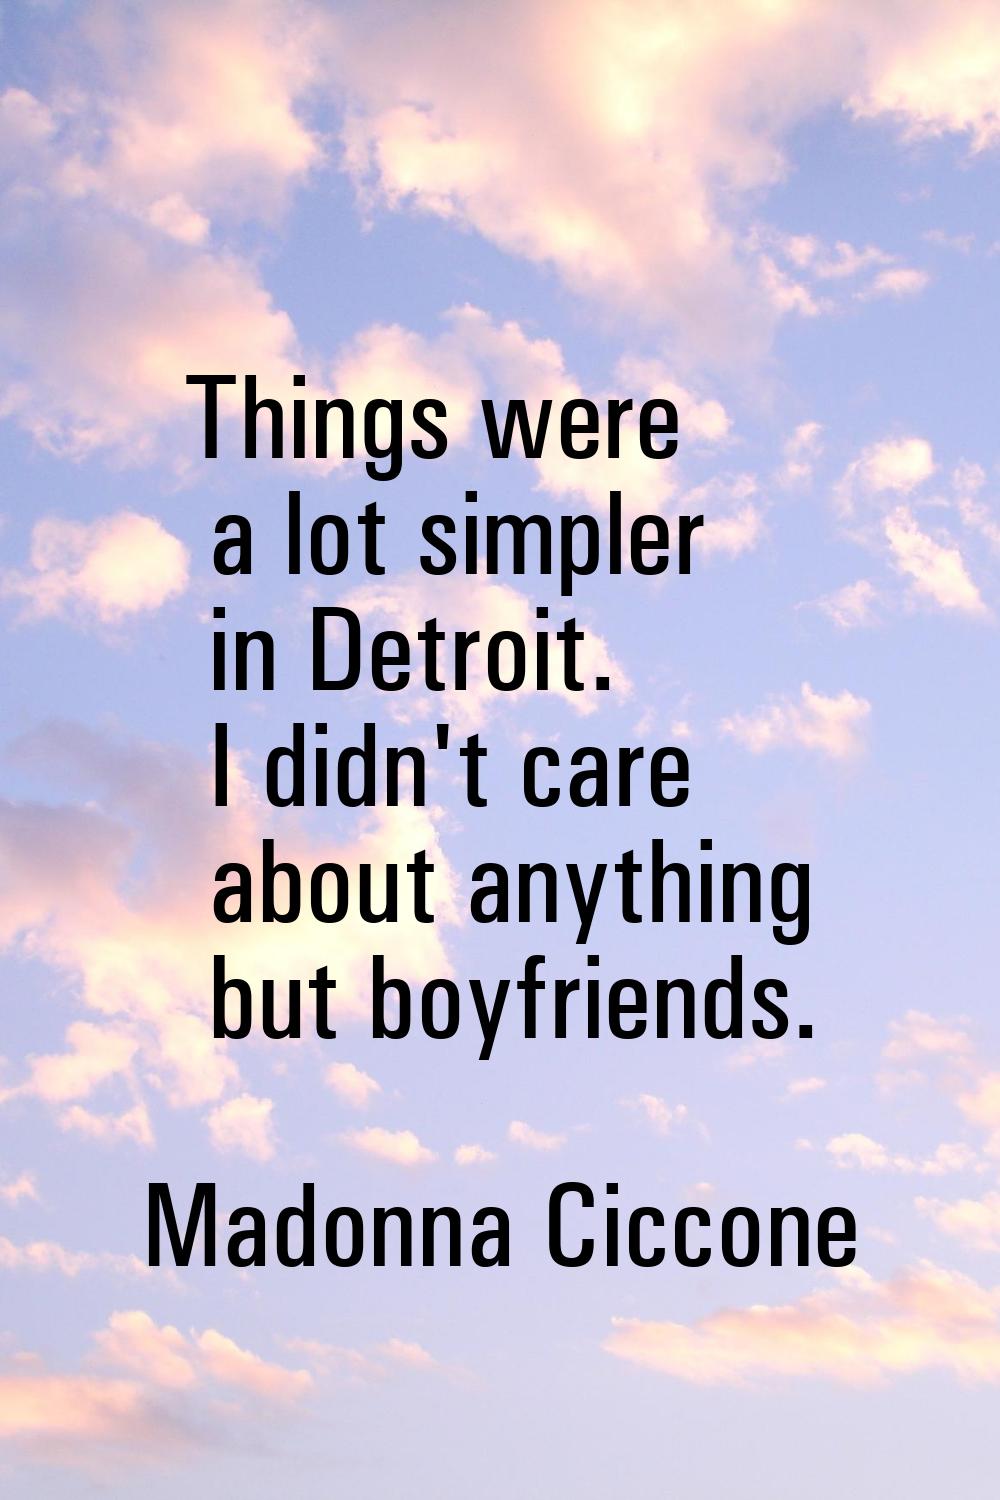 Things were a lot simpler in Detroit. I didn't care about anything but boyfriends.